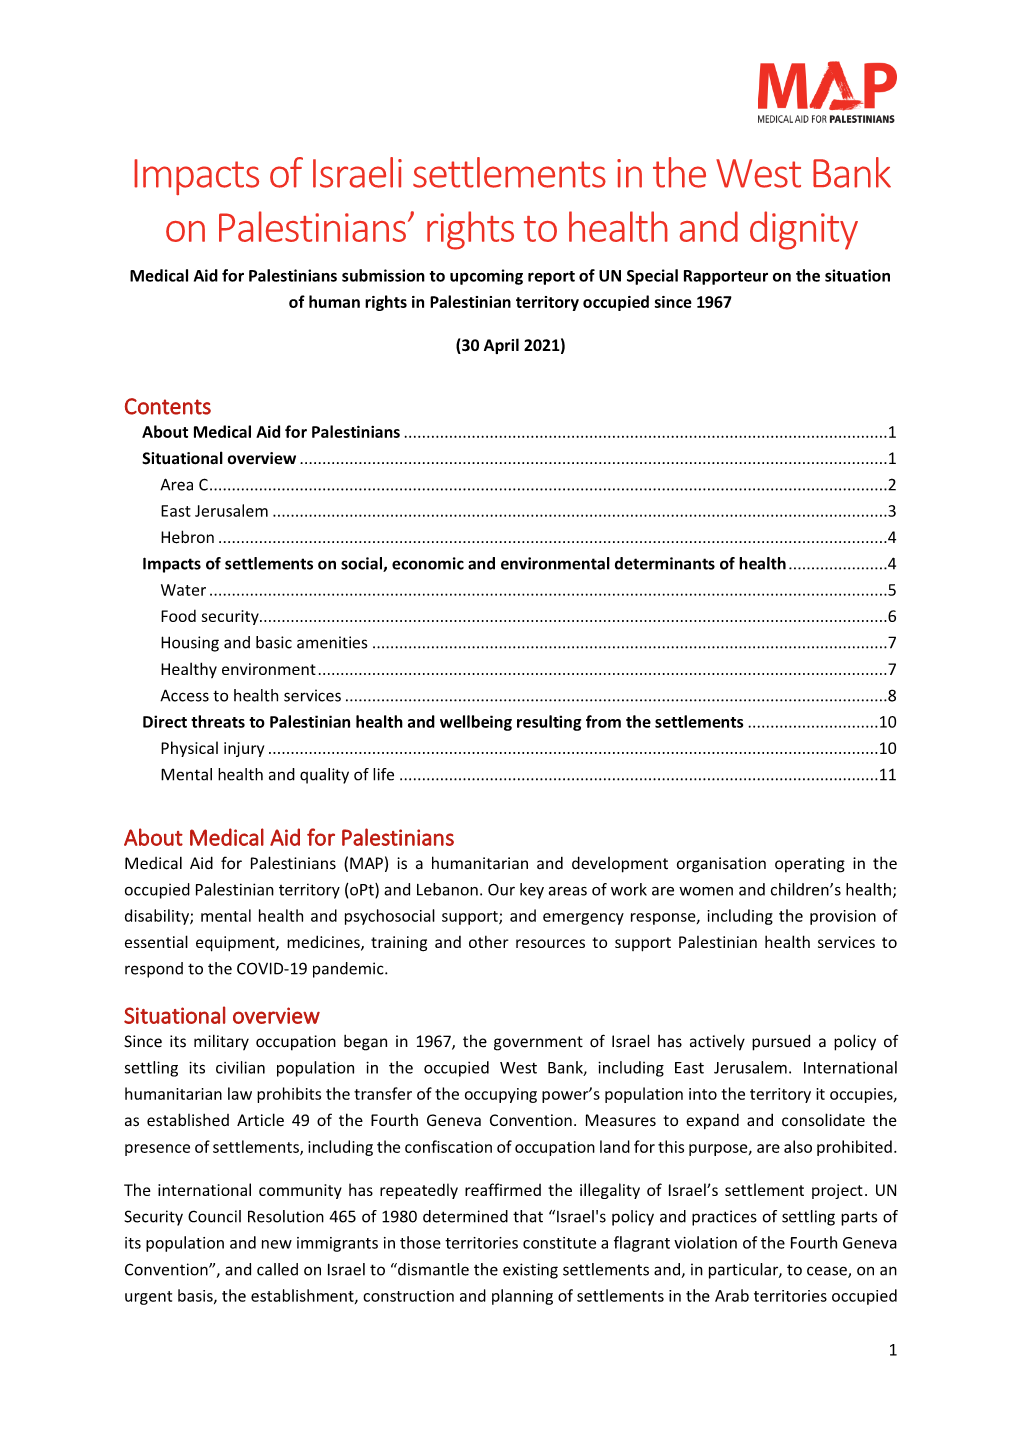 Impacts of Israeli Settlements in the West Bank on Palestinians' Rights To